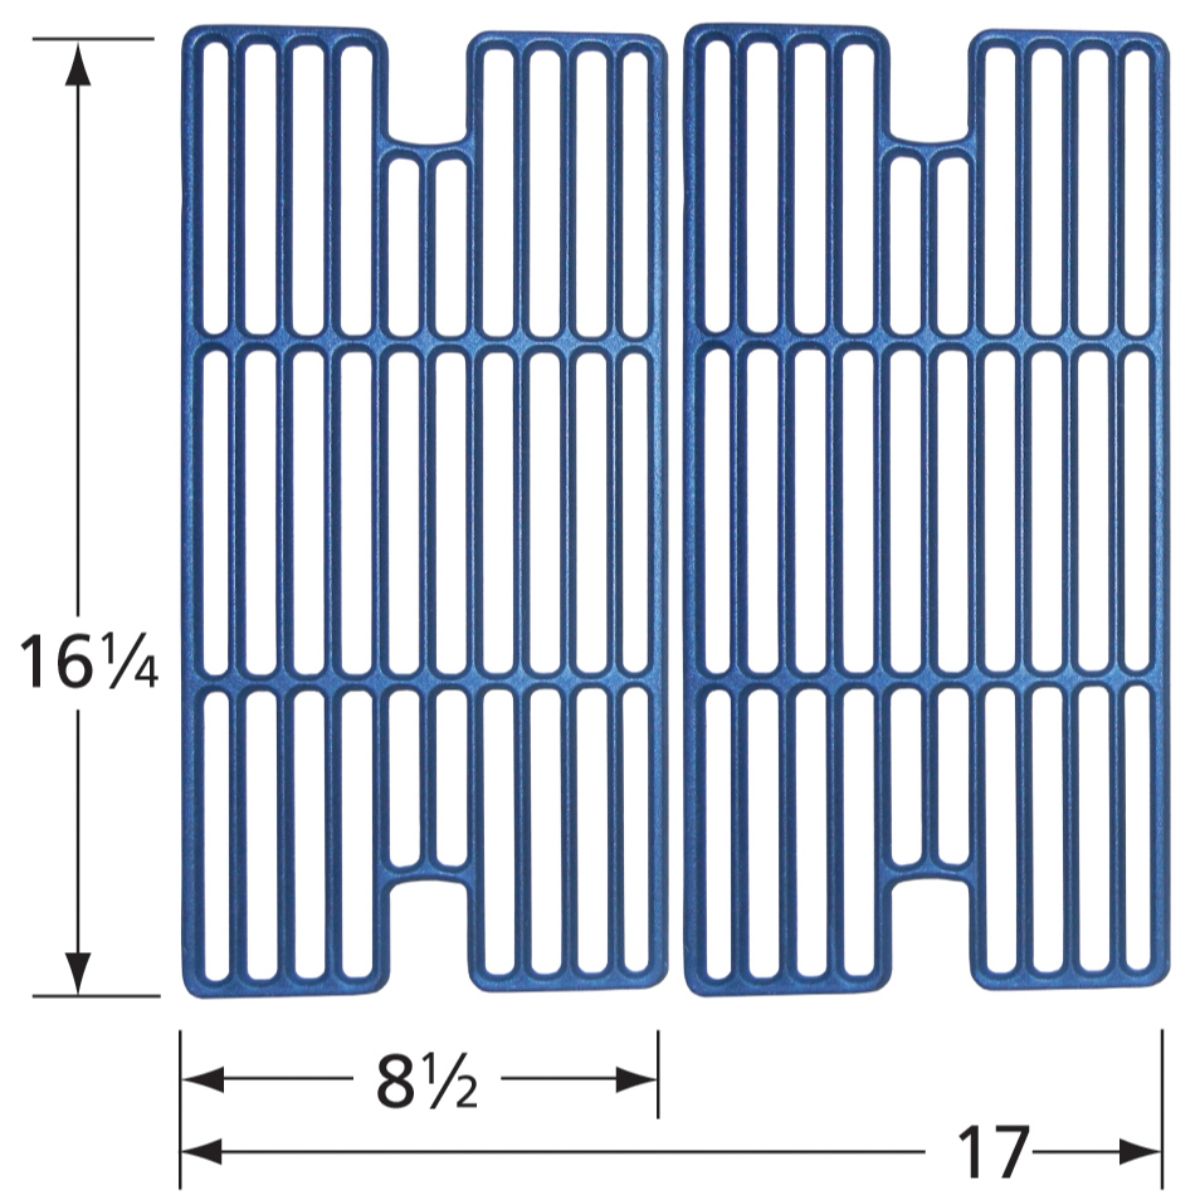 Matte cast iron cooking grid for Backyard Grill brand gas grills - image 2 of 2